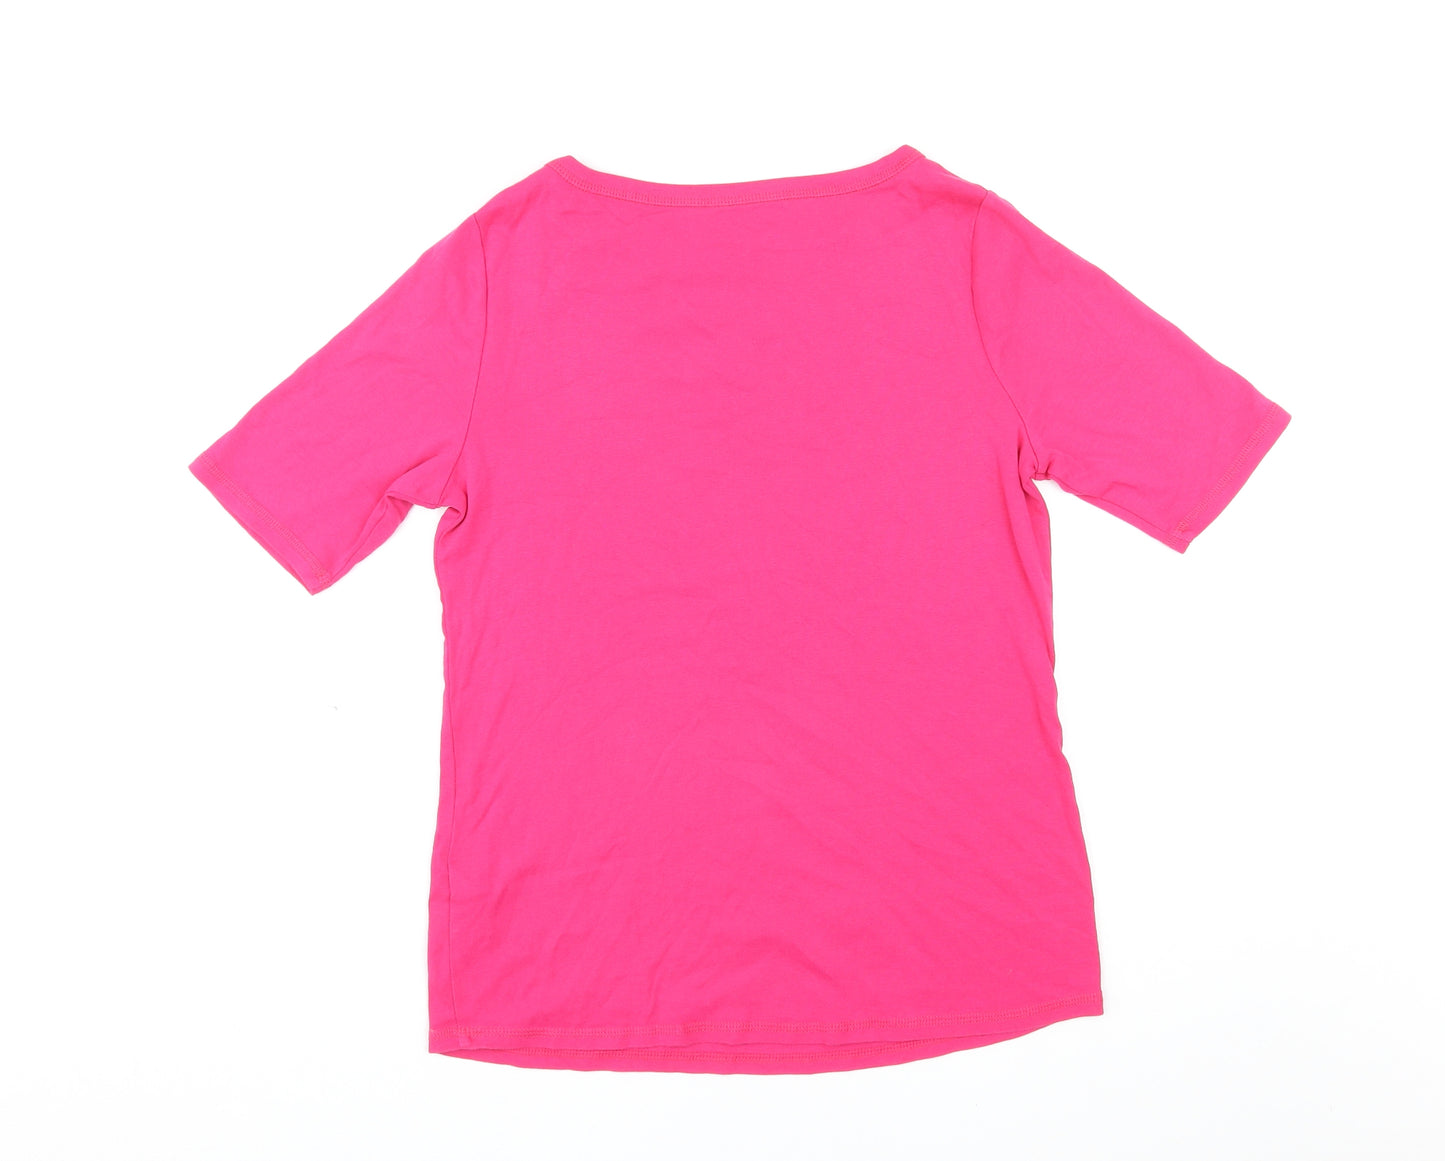 Marks and Spencer Womens Pink Cotton Basic T-Shirt Size 14 Round Neck